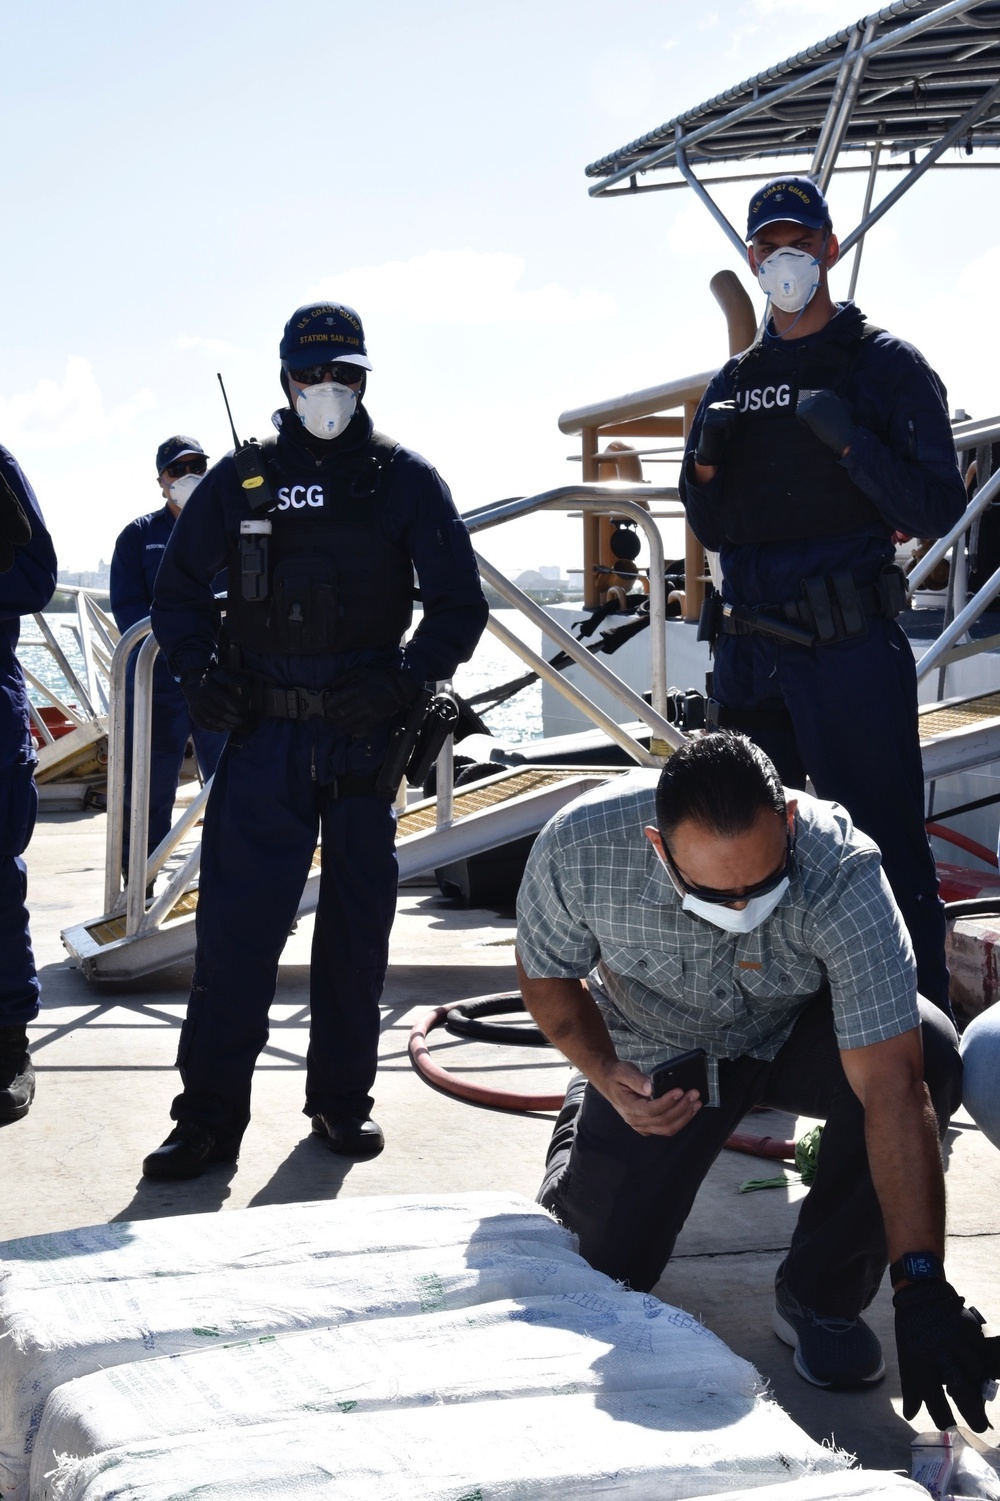 Coast Guard transfers 3 smugglers, over $5.6 million in seized cocaine to federal agents in Puerto Rico, following at sea interdiction near the U.S. Virgin Islands